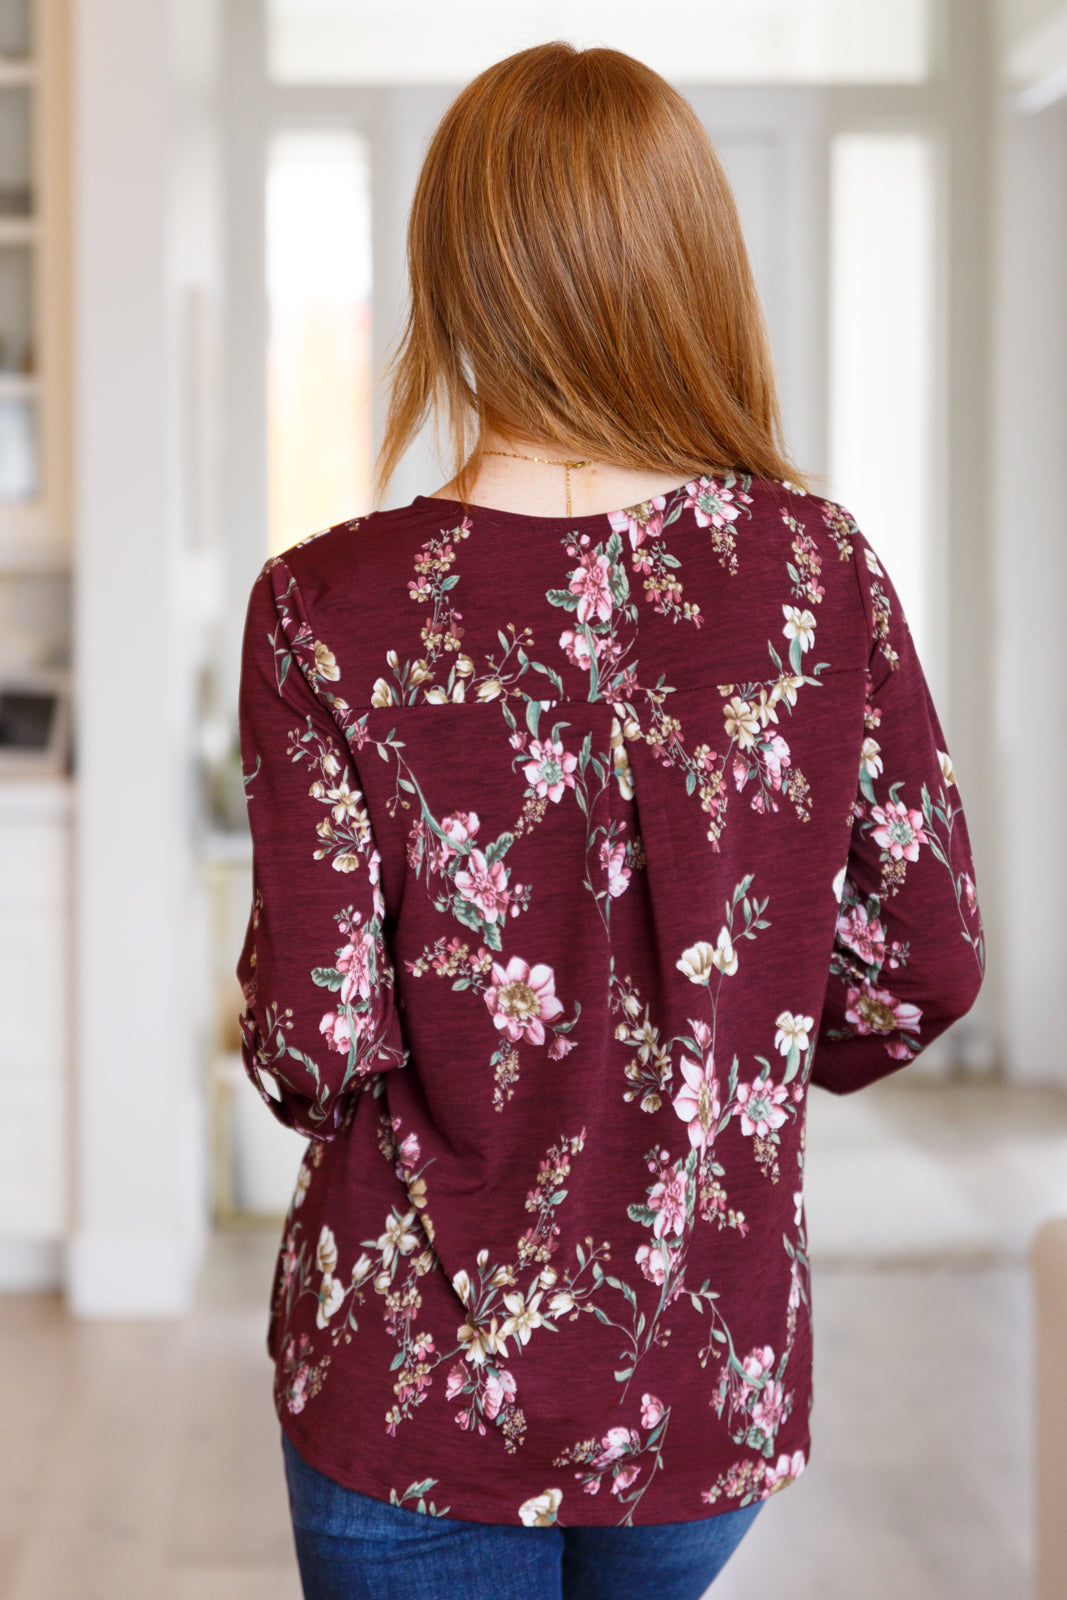 Hometown Classic Top in Wine Floral - SAMPLE